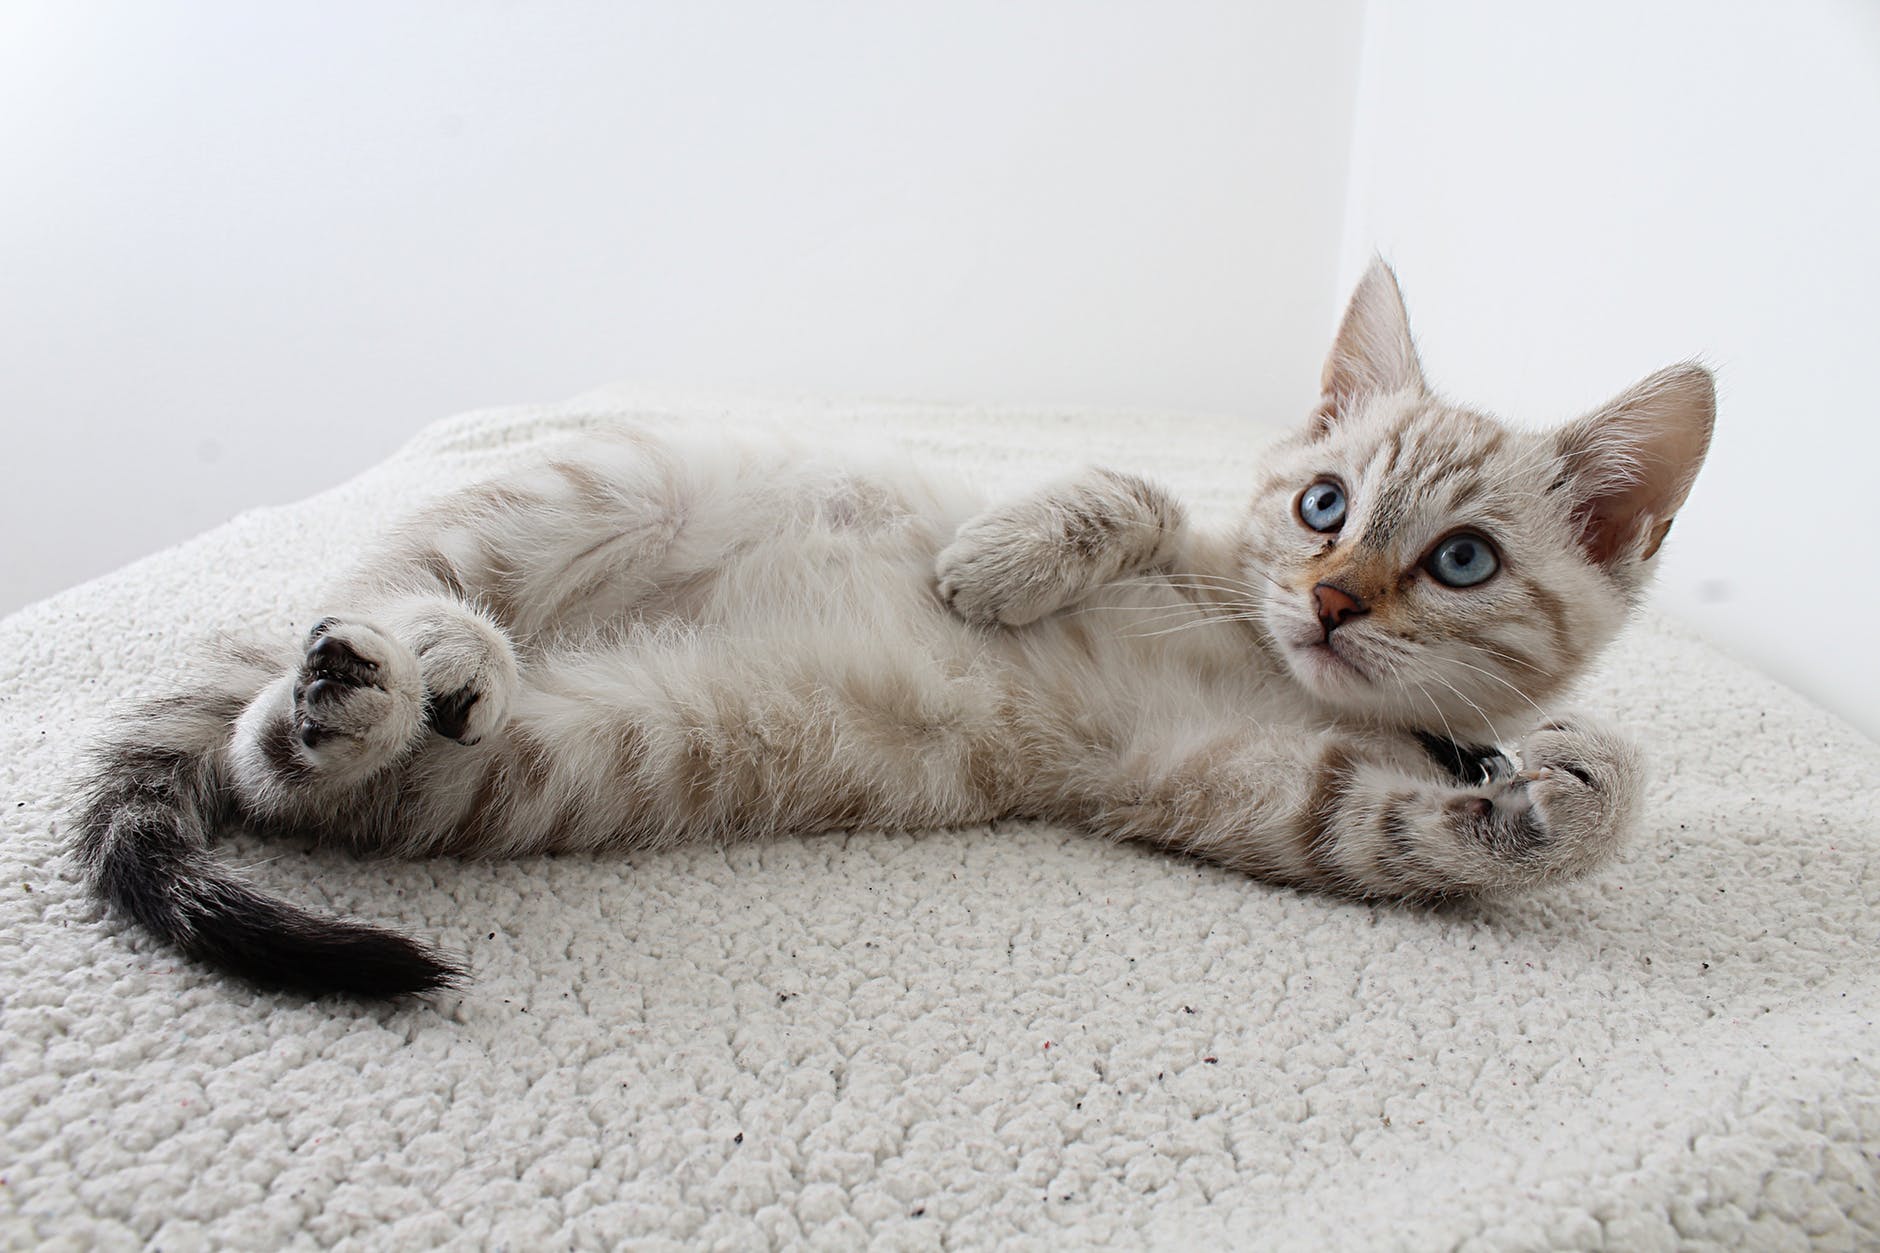 A grey tabby kitten lying down and staring at someone